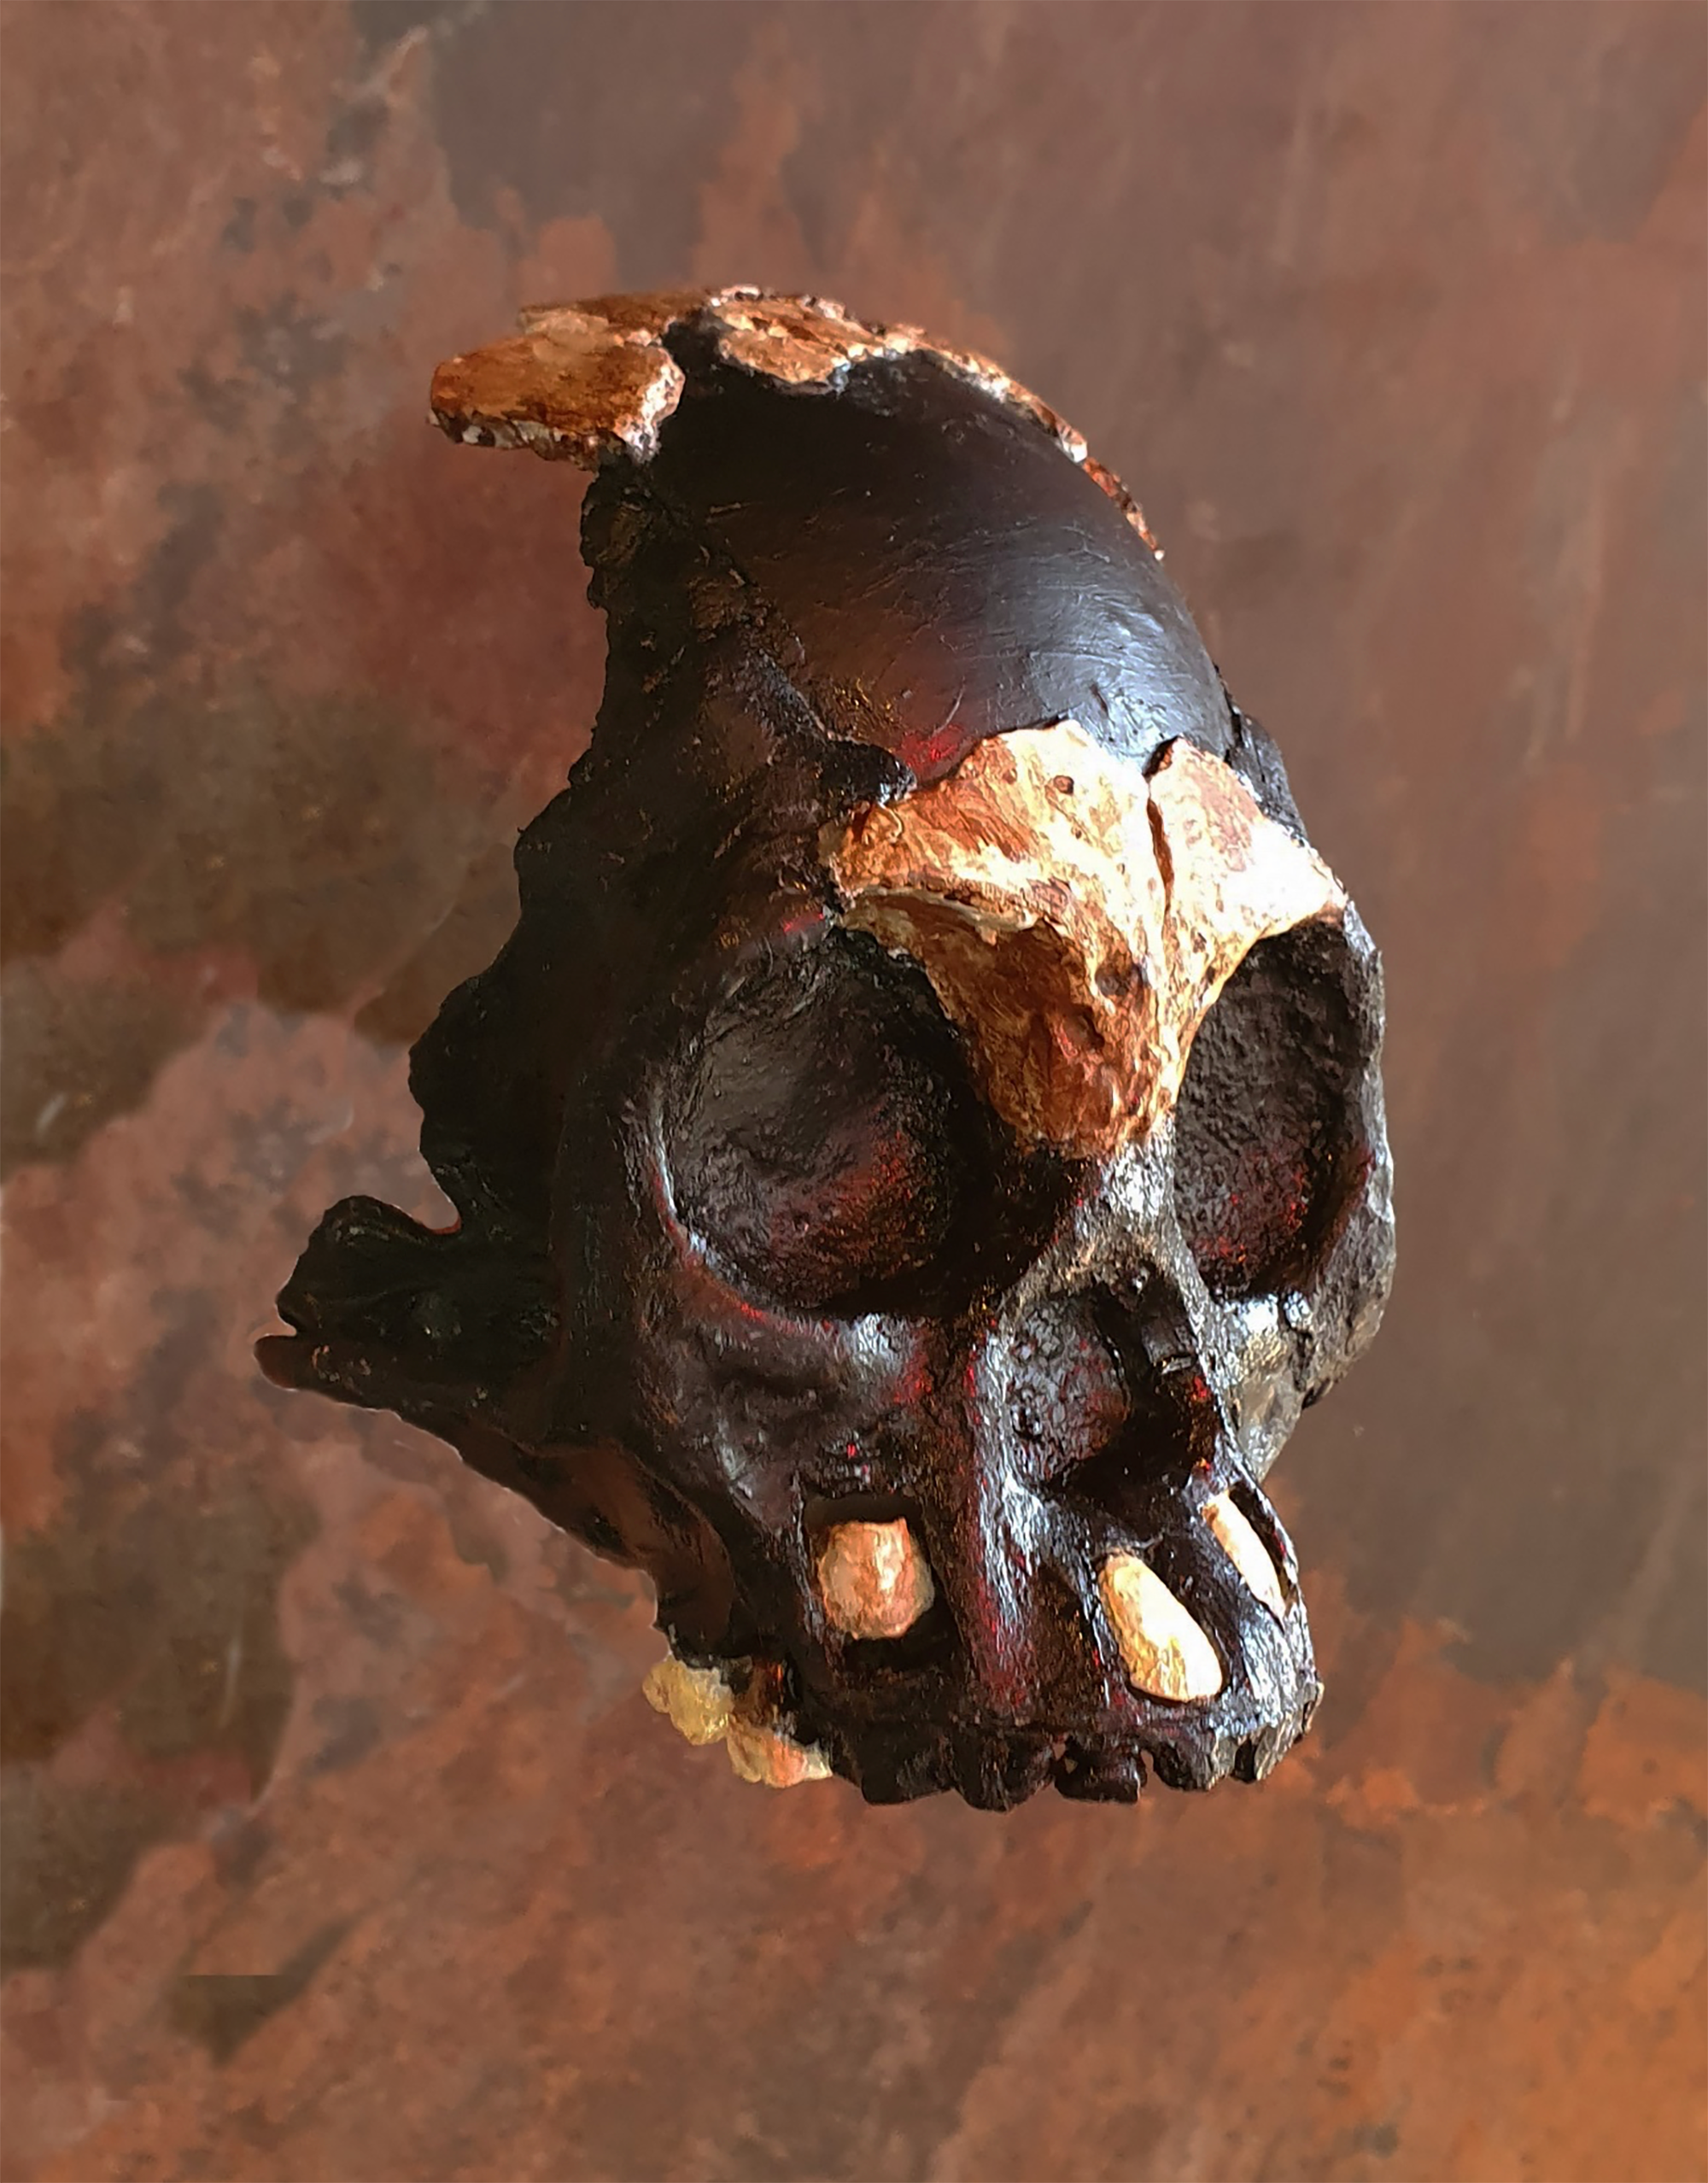 The “Leti” skull is of  young child Homo naledi found in a remote passage of the Dinaledi Subsystem of the Rising Star cave without remains of the body.